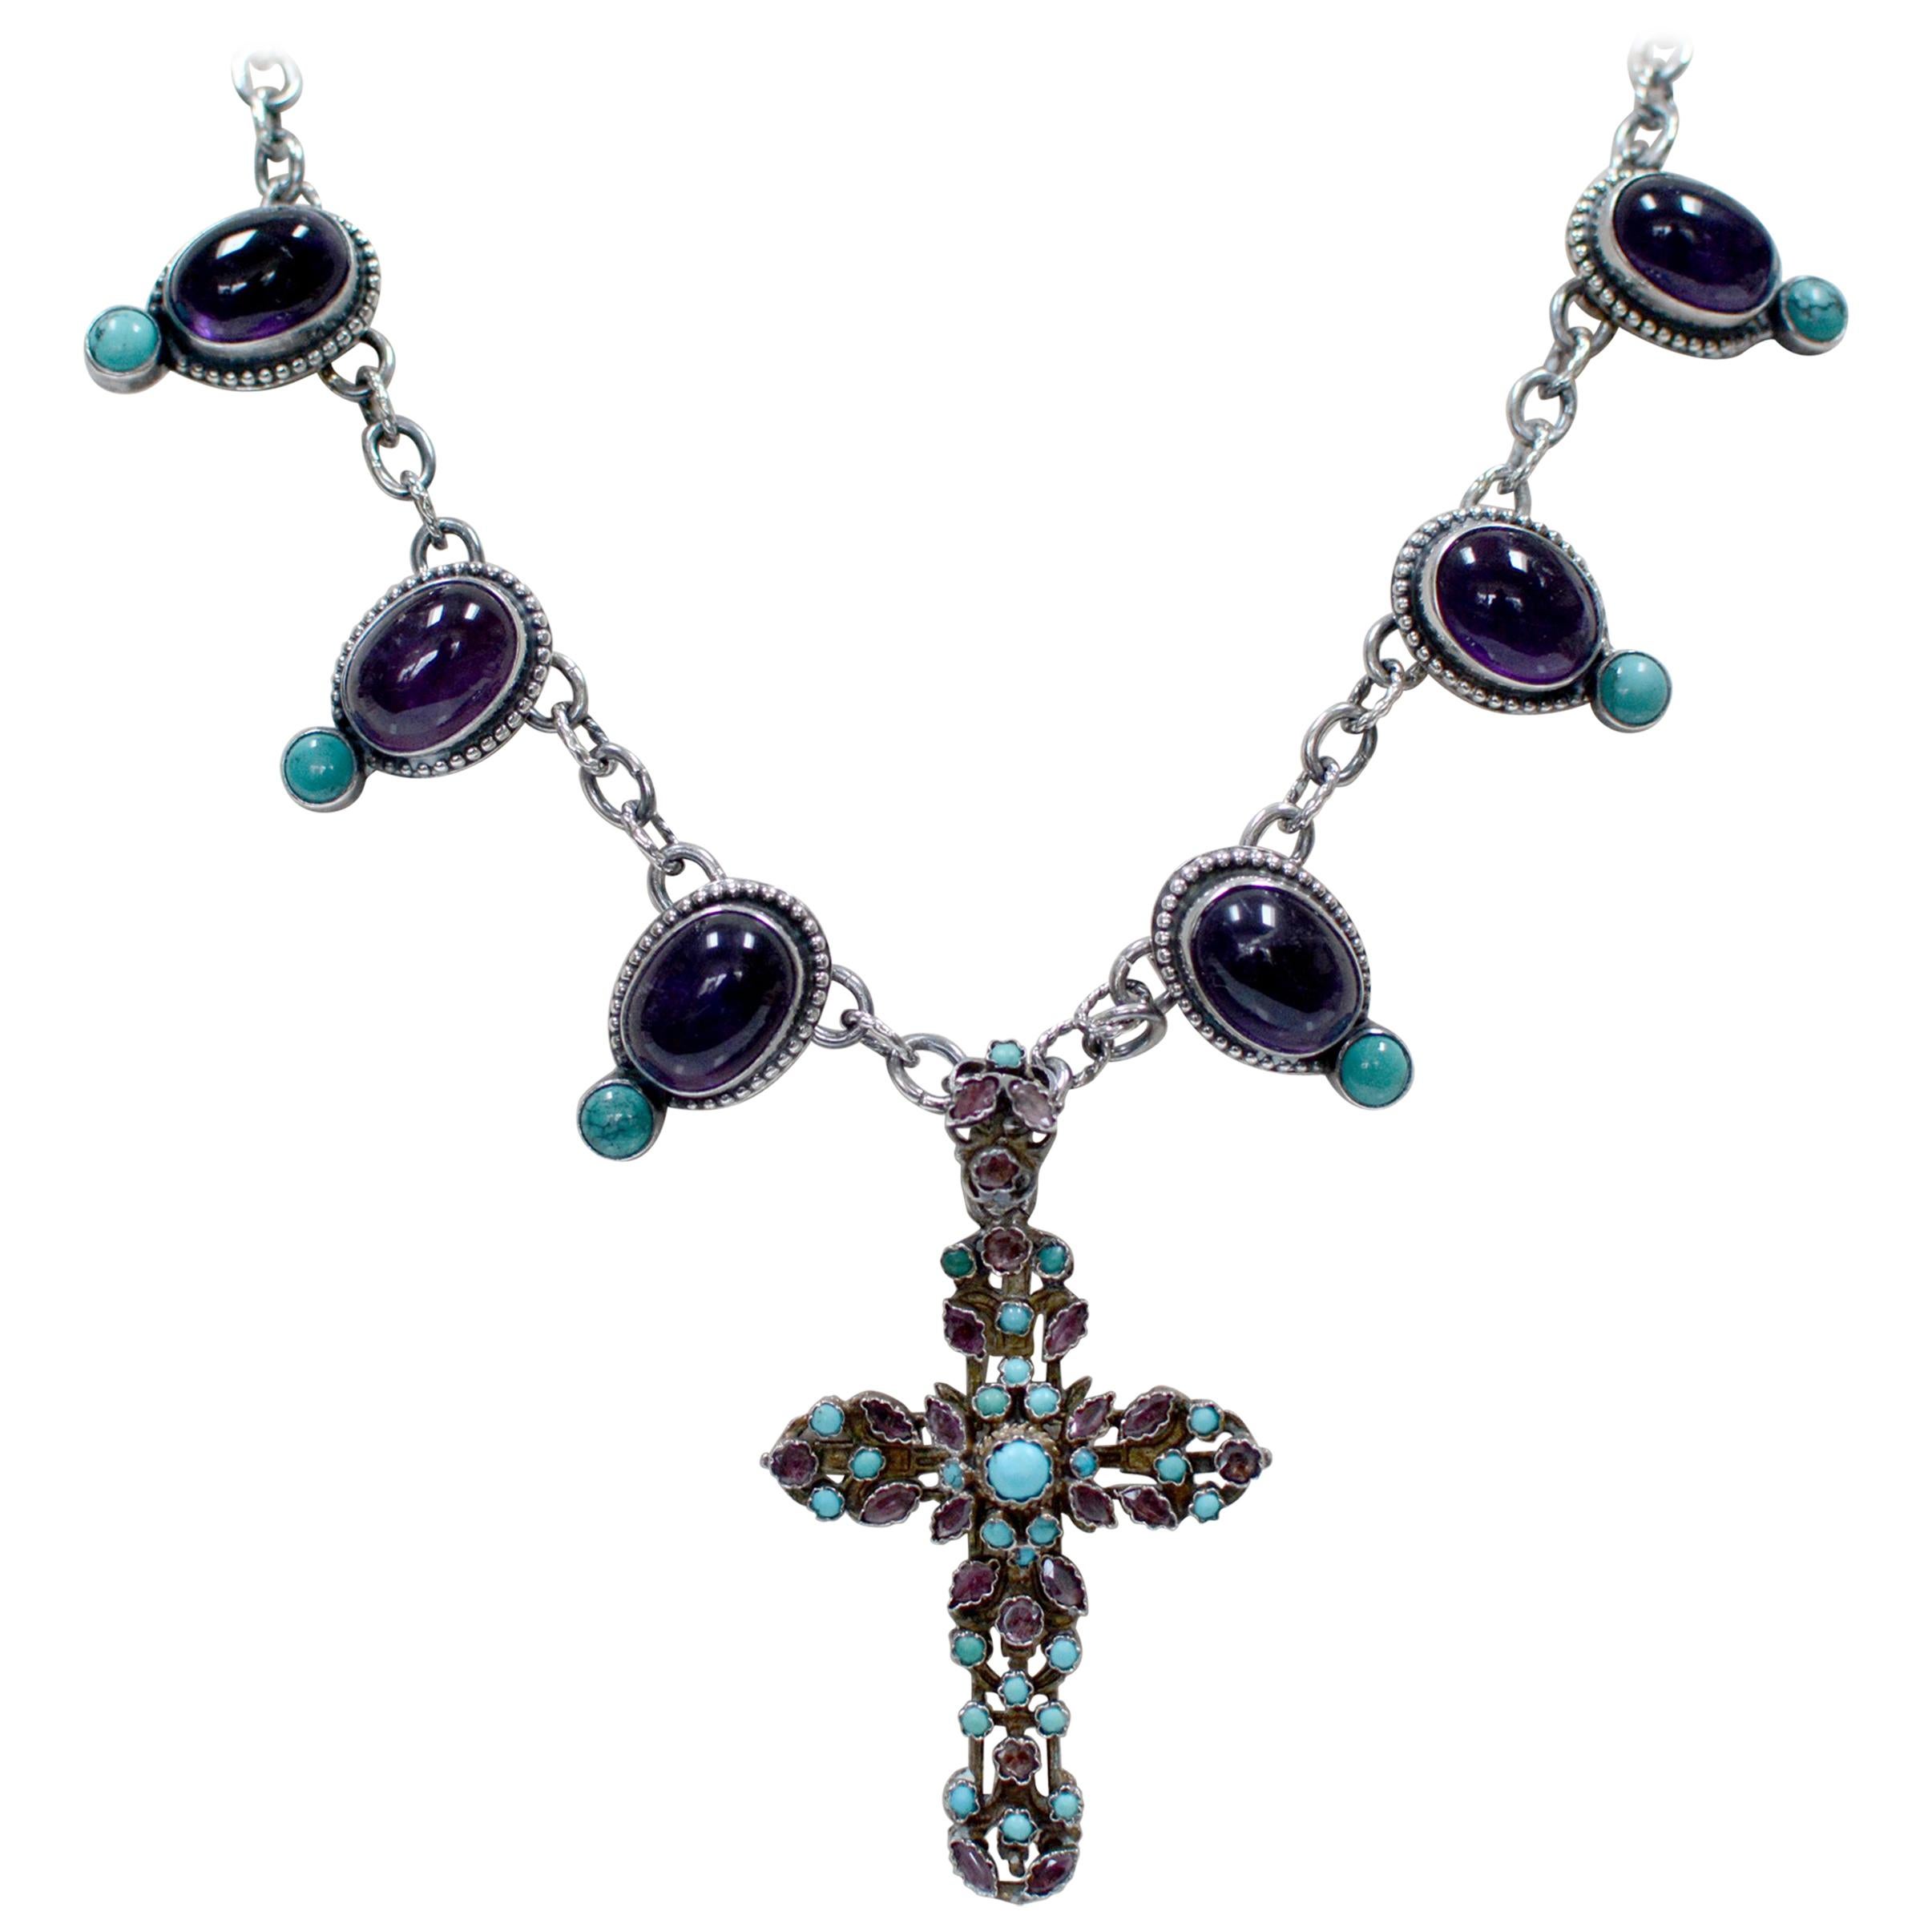 Jill Garber Antique Austro Hungarian Cross Necklace with Turquoise and Amethyst